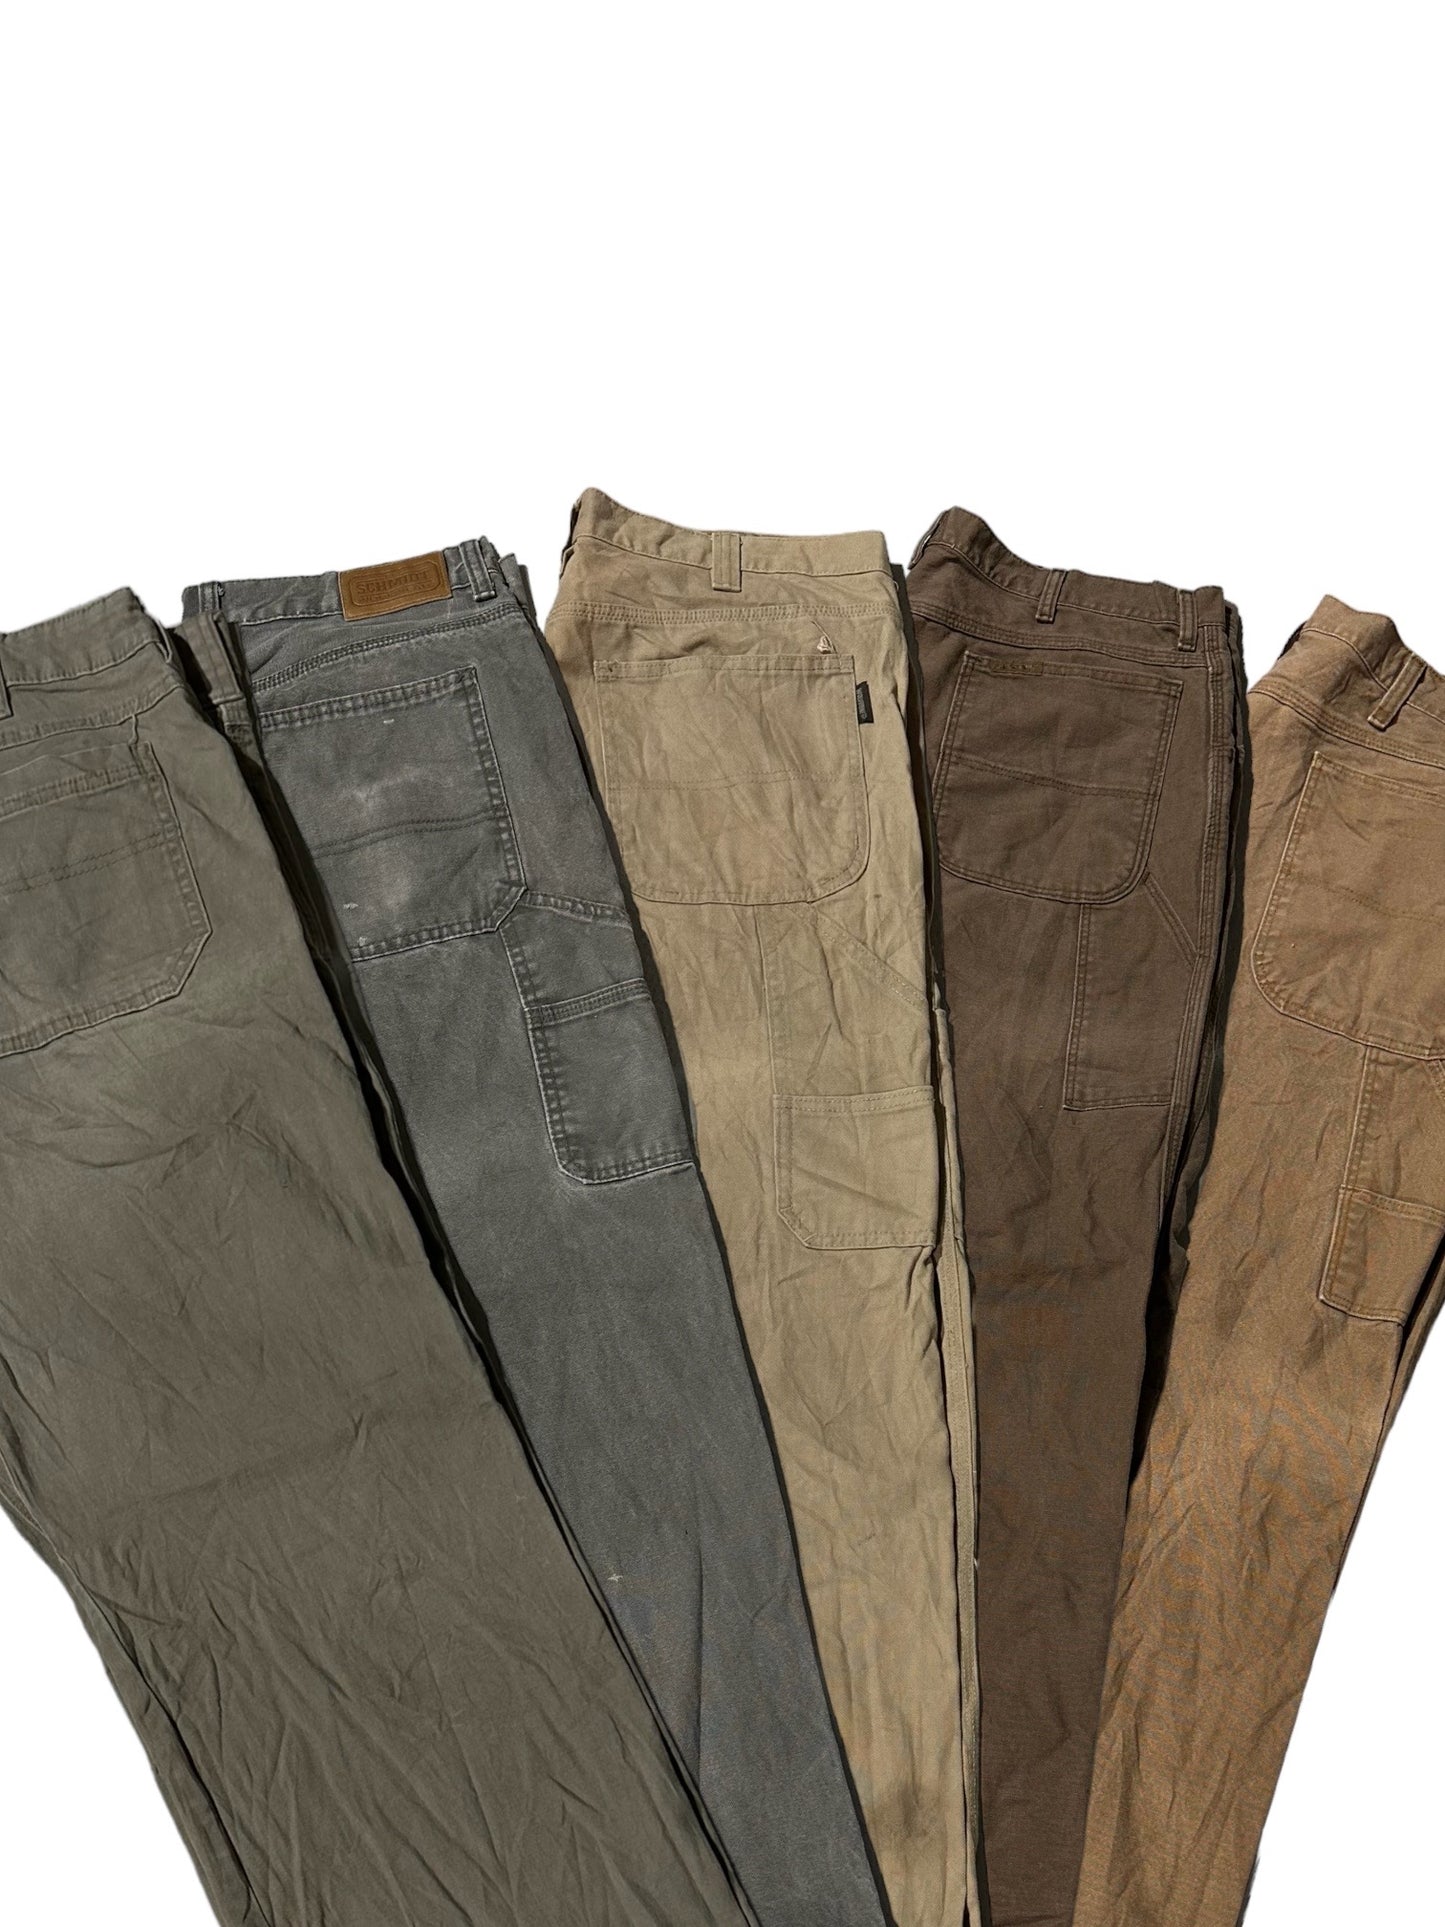 UNBRANDED WORKWEAR TROUSERS - 30 PIECES  - SUPER SACK